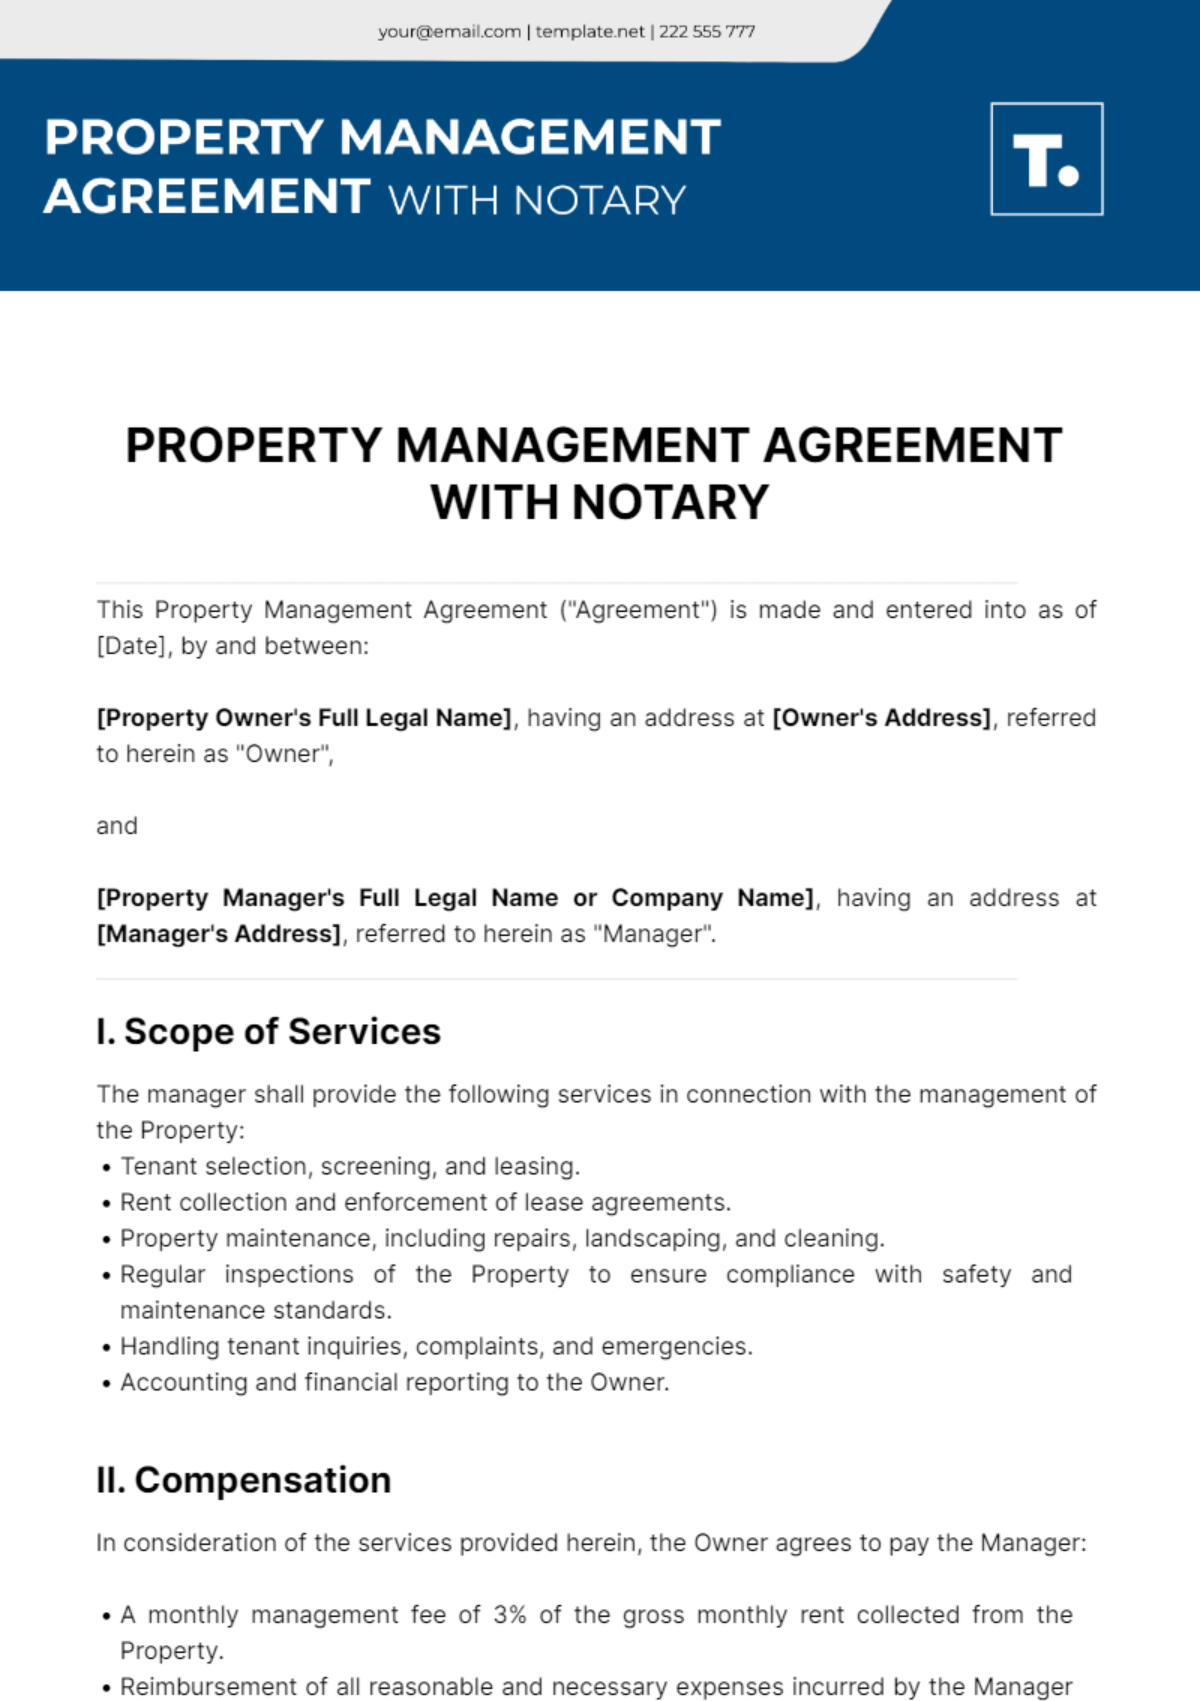 Free Property Management Agreement With Notary Template